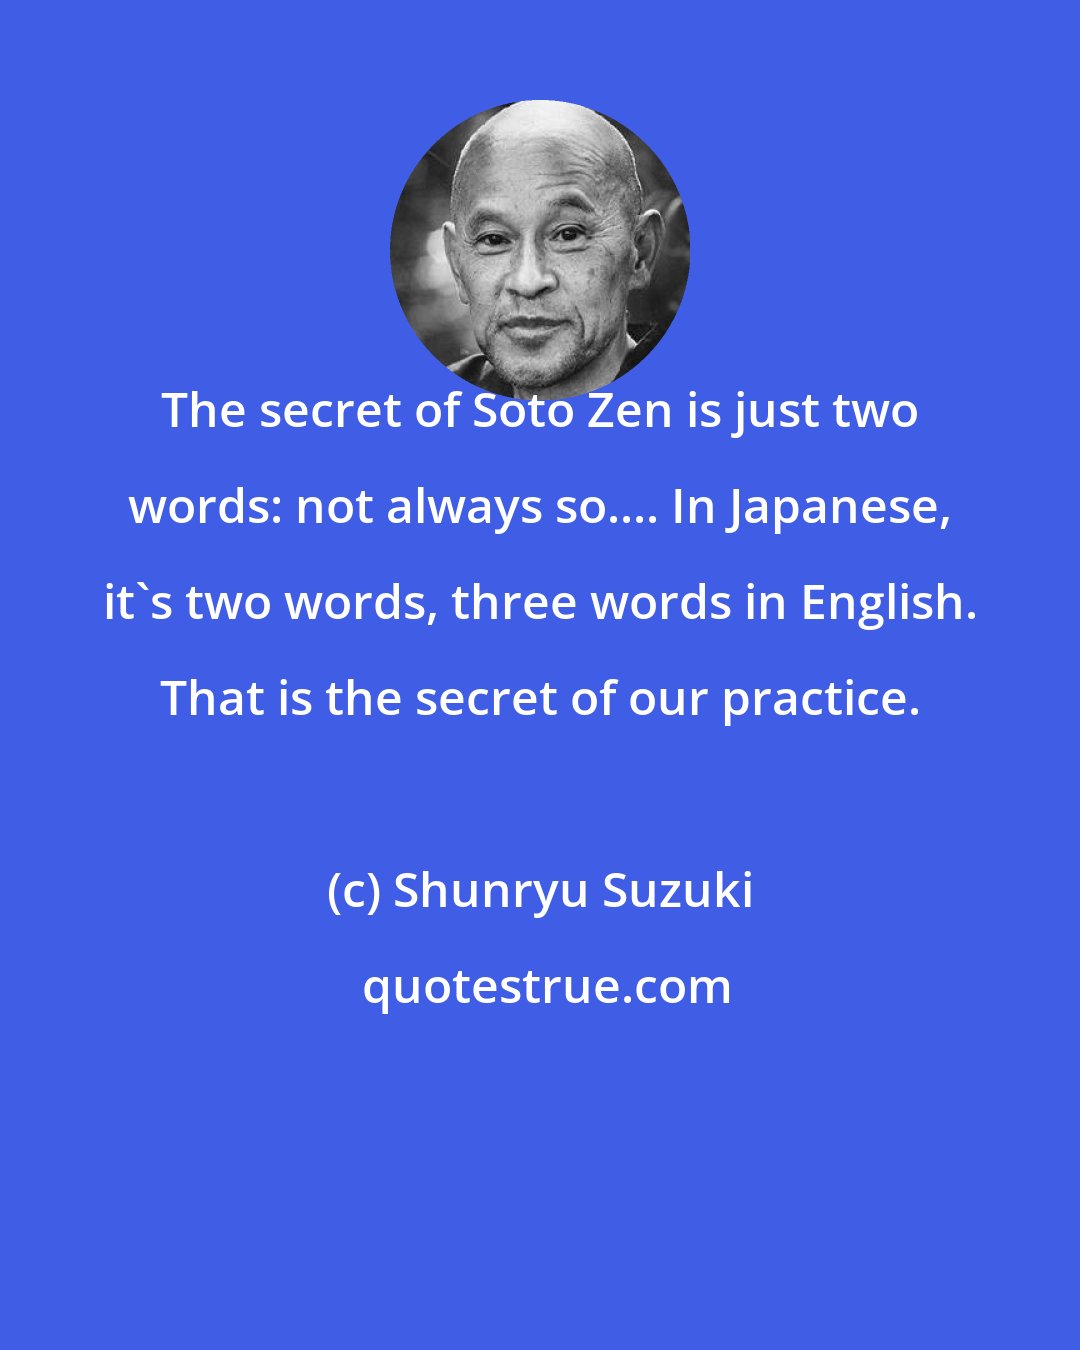 Shunryu Suzuki: The secret of Soto Zen is just two words: not always so.... In Japanese, it's two words, three words in English. That is the secret of our practice.